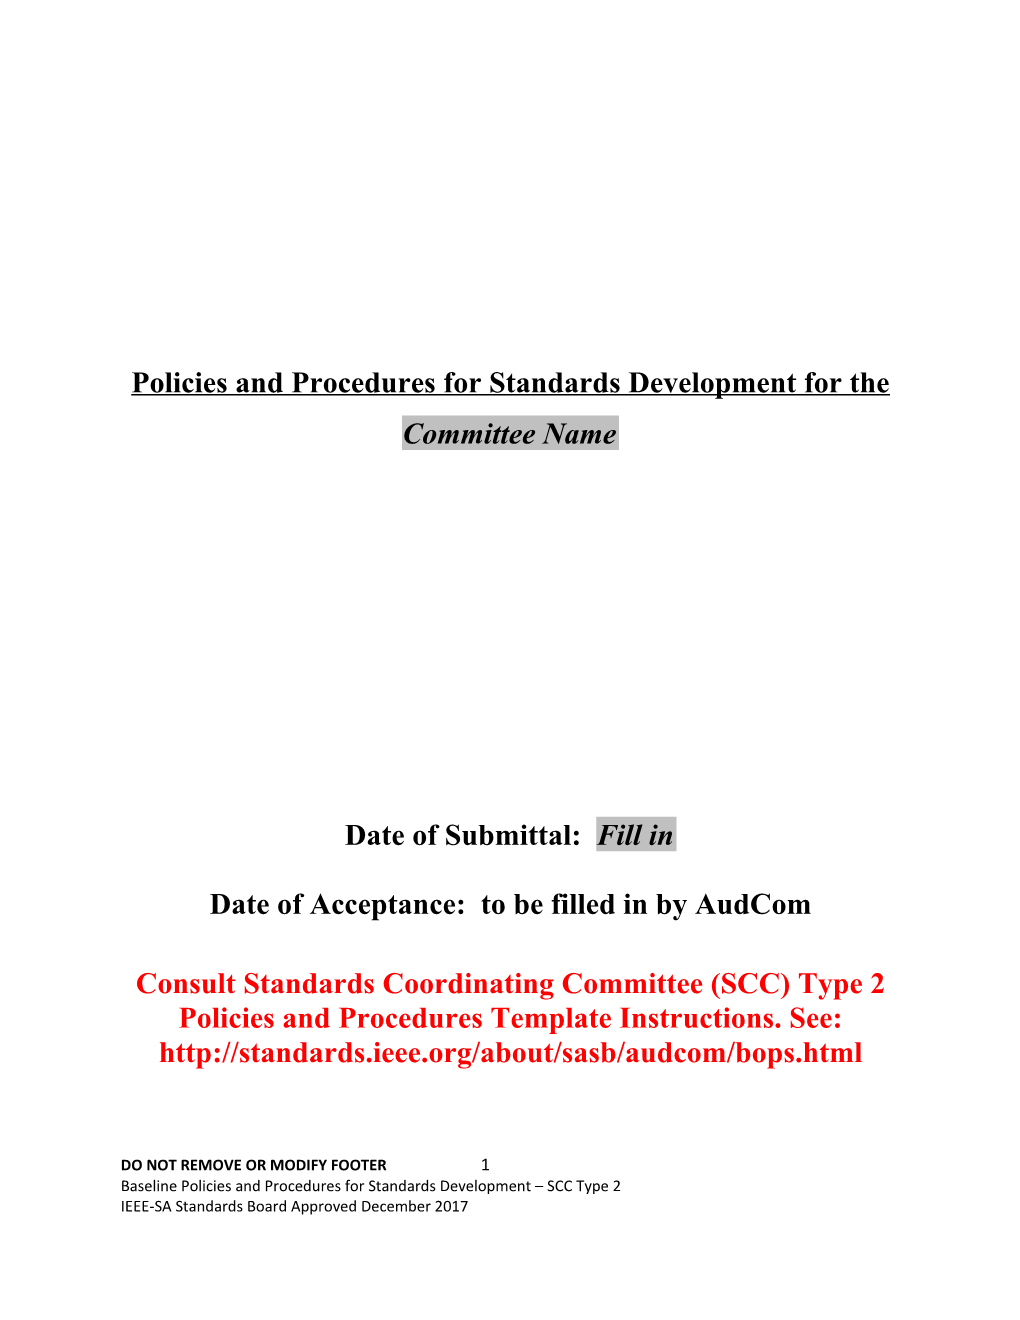 Policies and Procedures for Standards Development for The